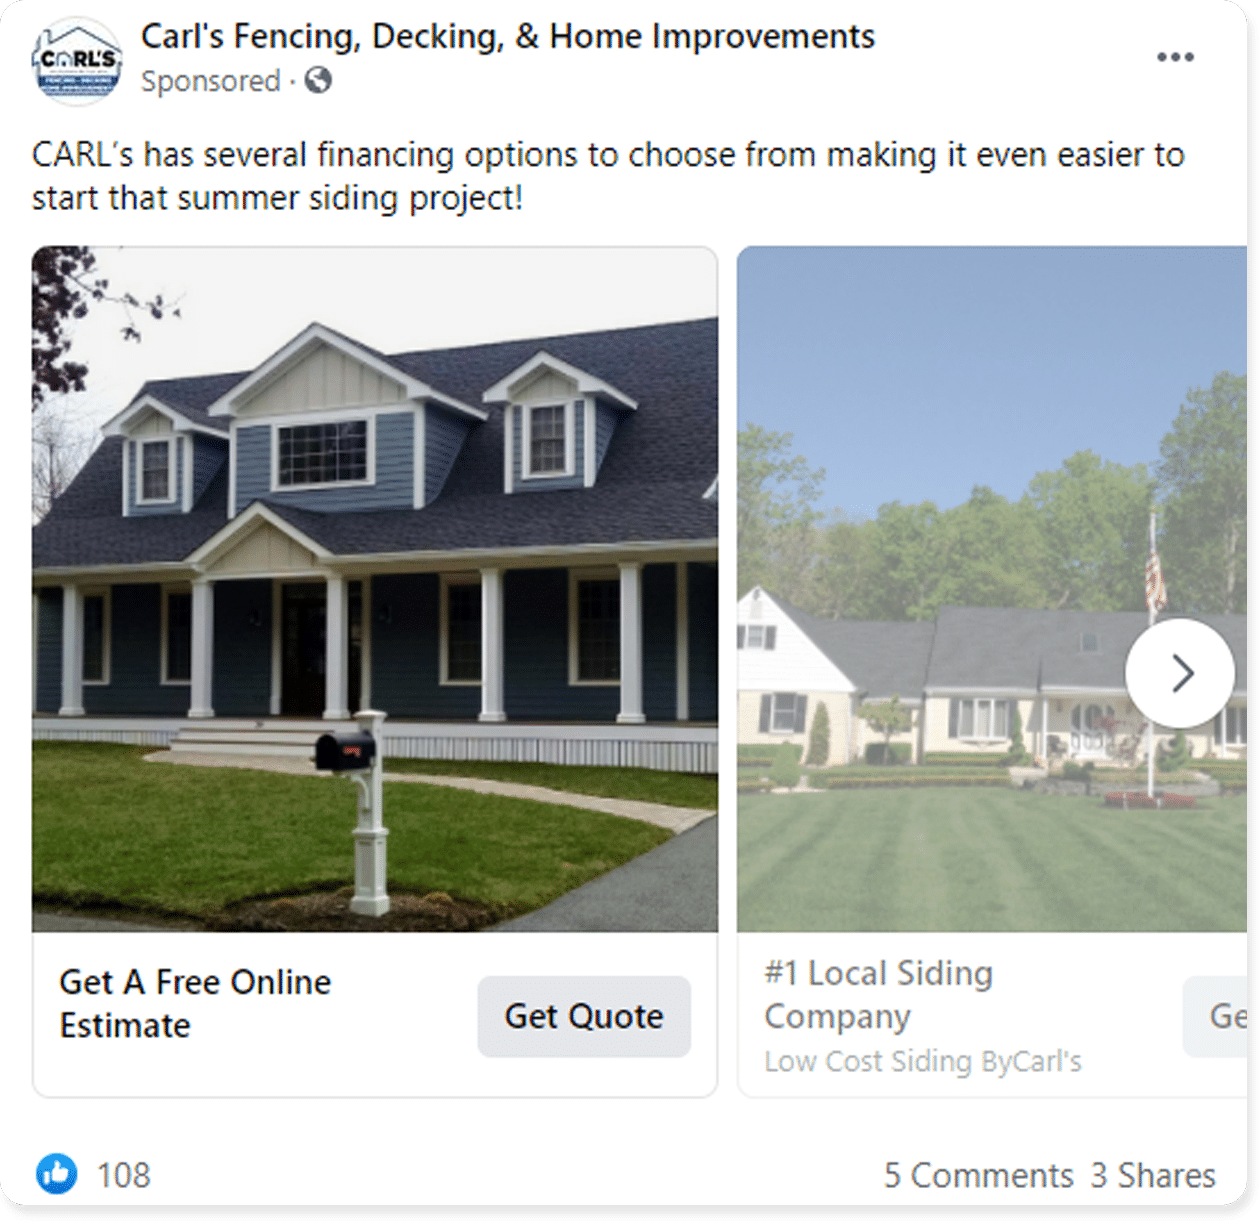 fencing decking home improvement fb ad example